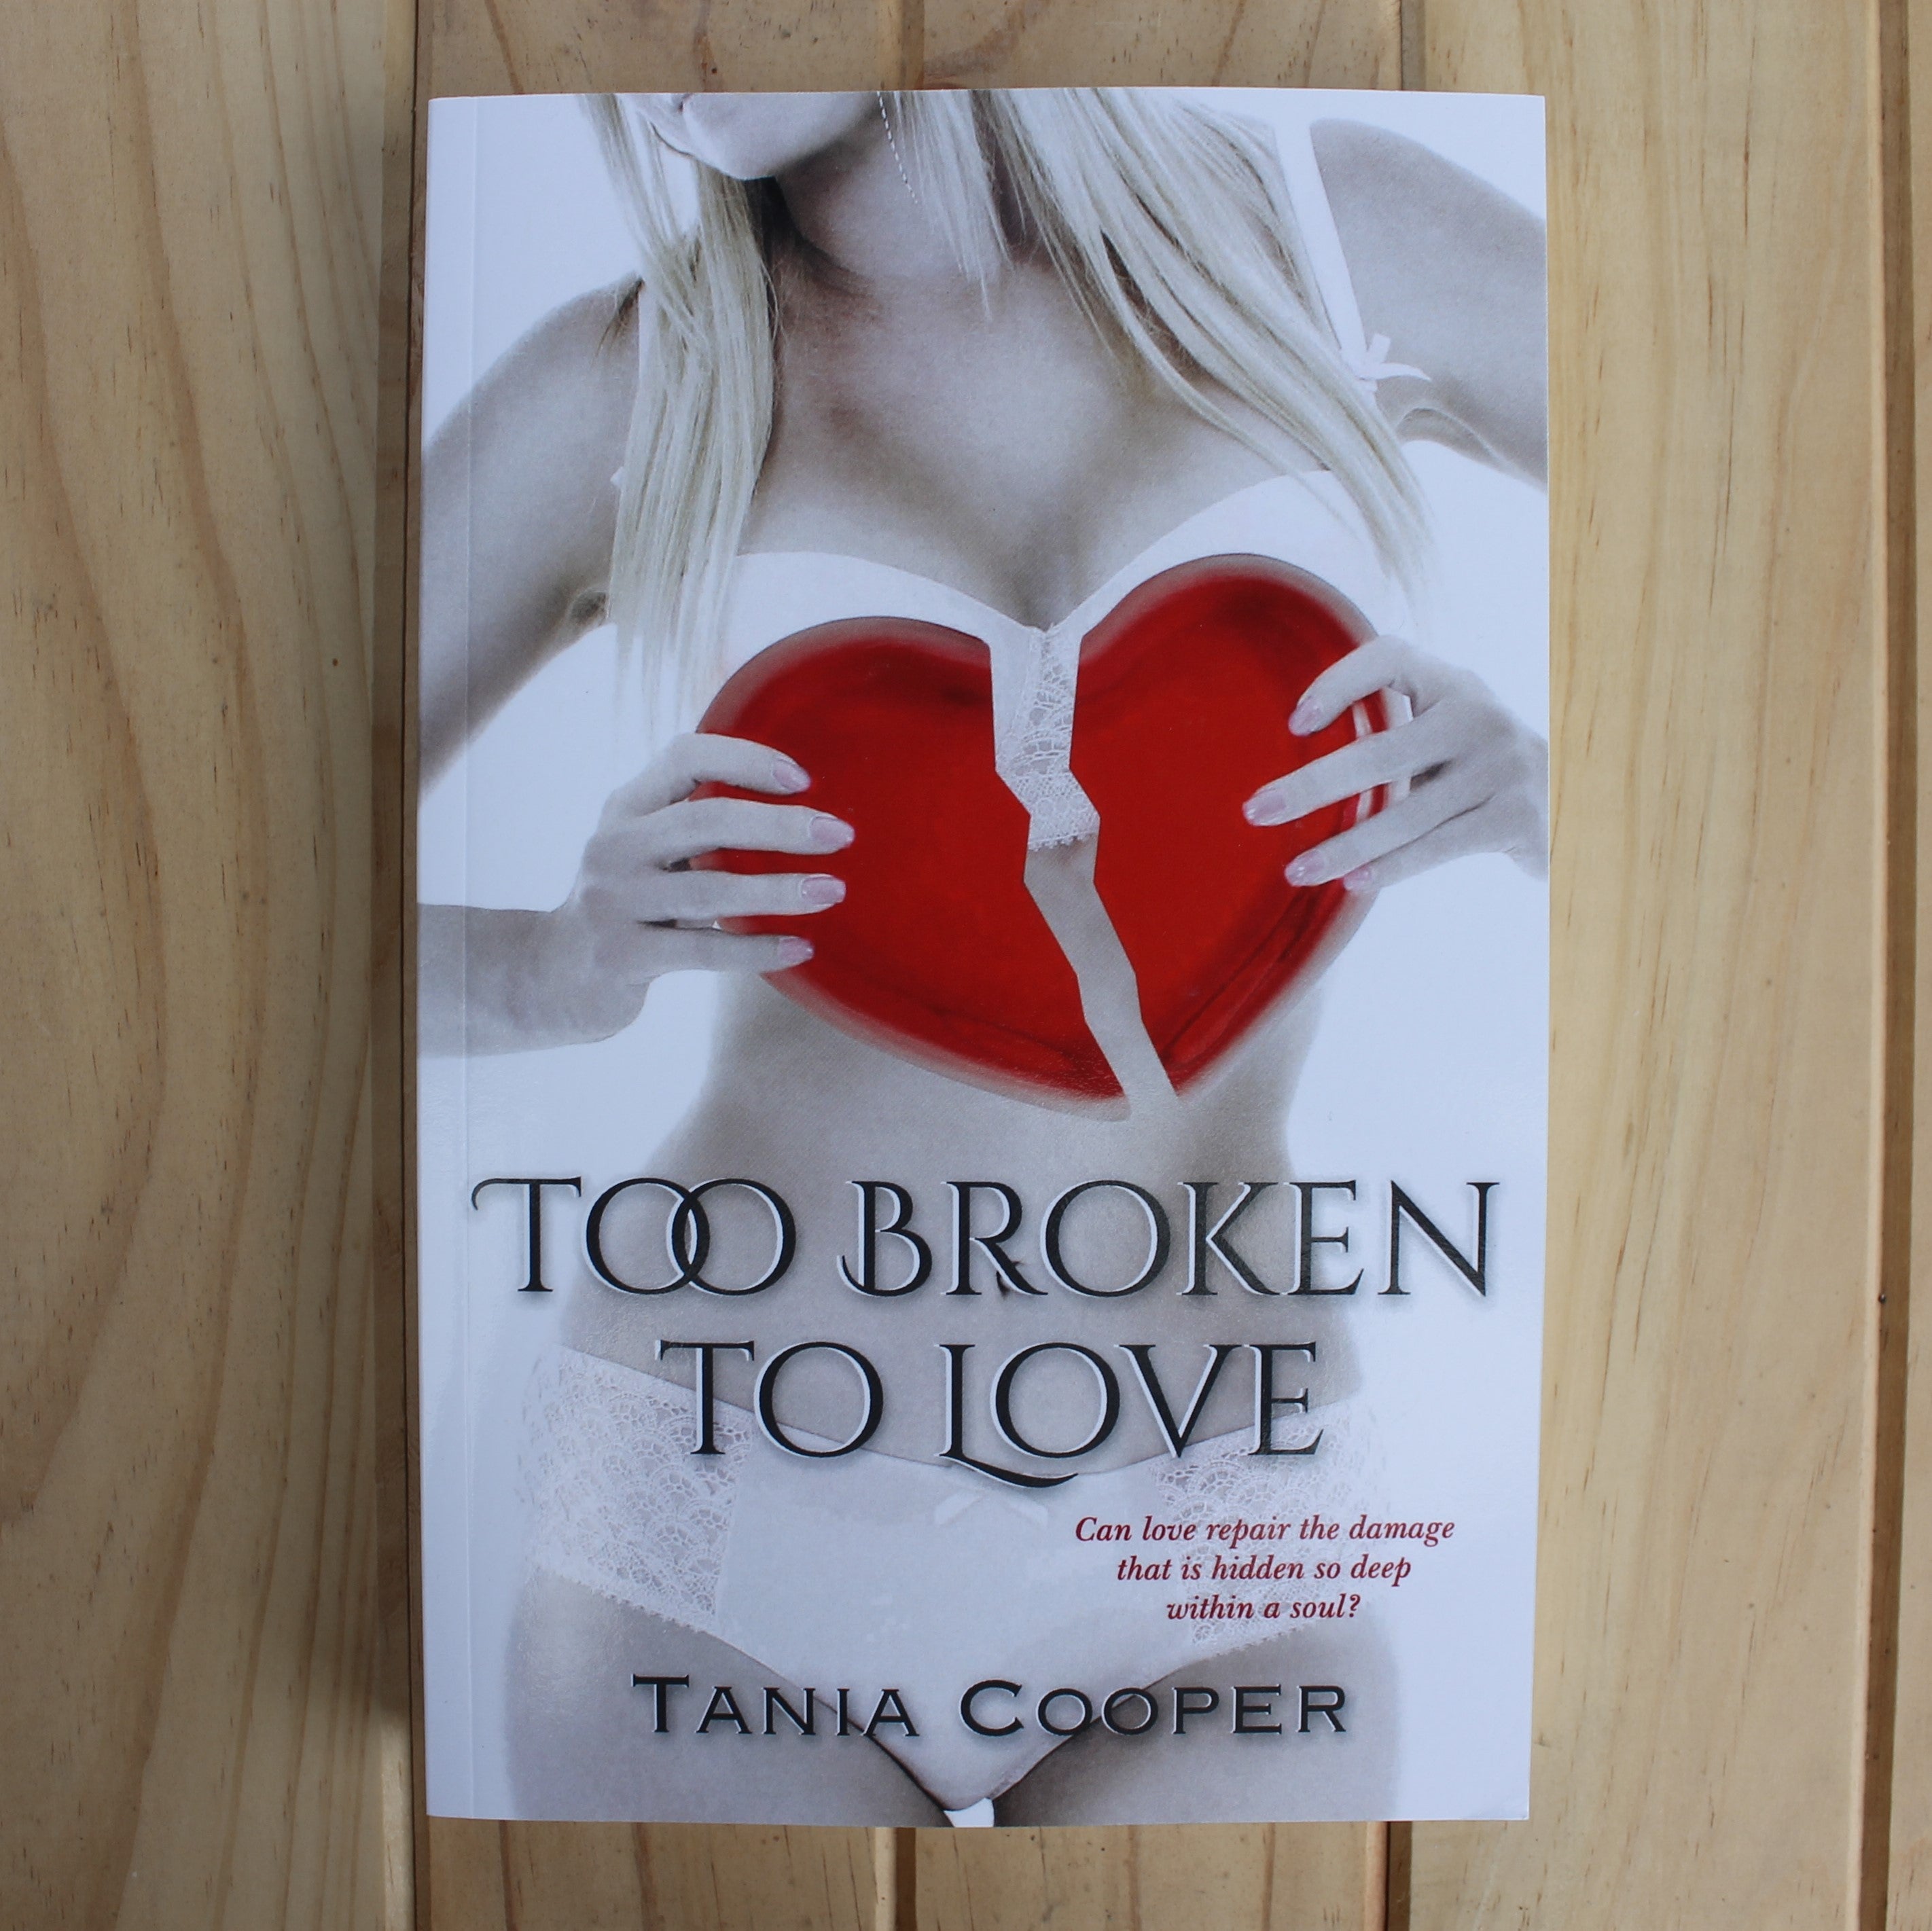 Too Broken To Love by Tania Cooper